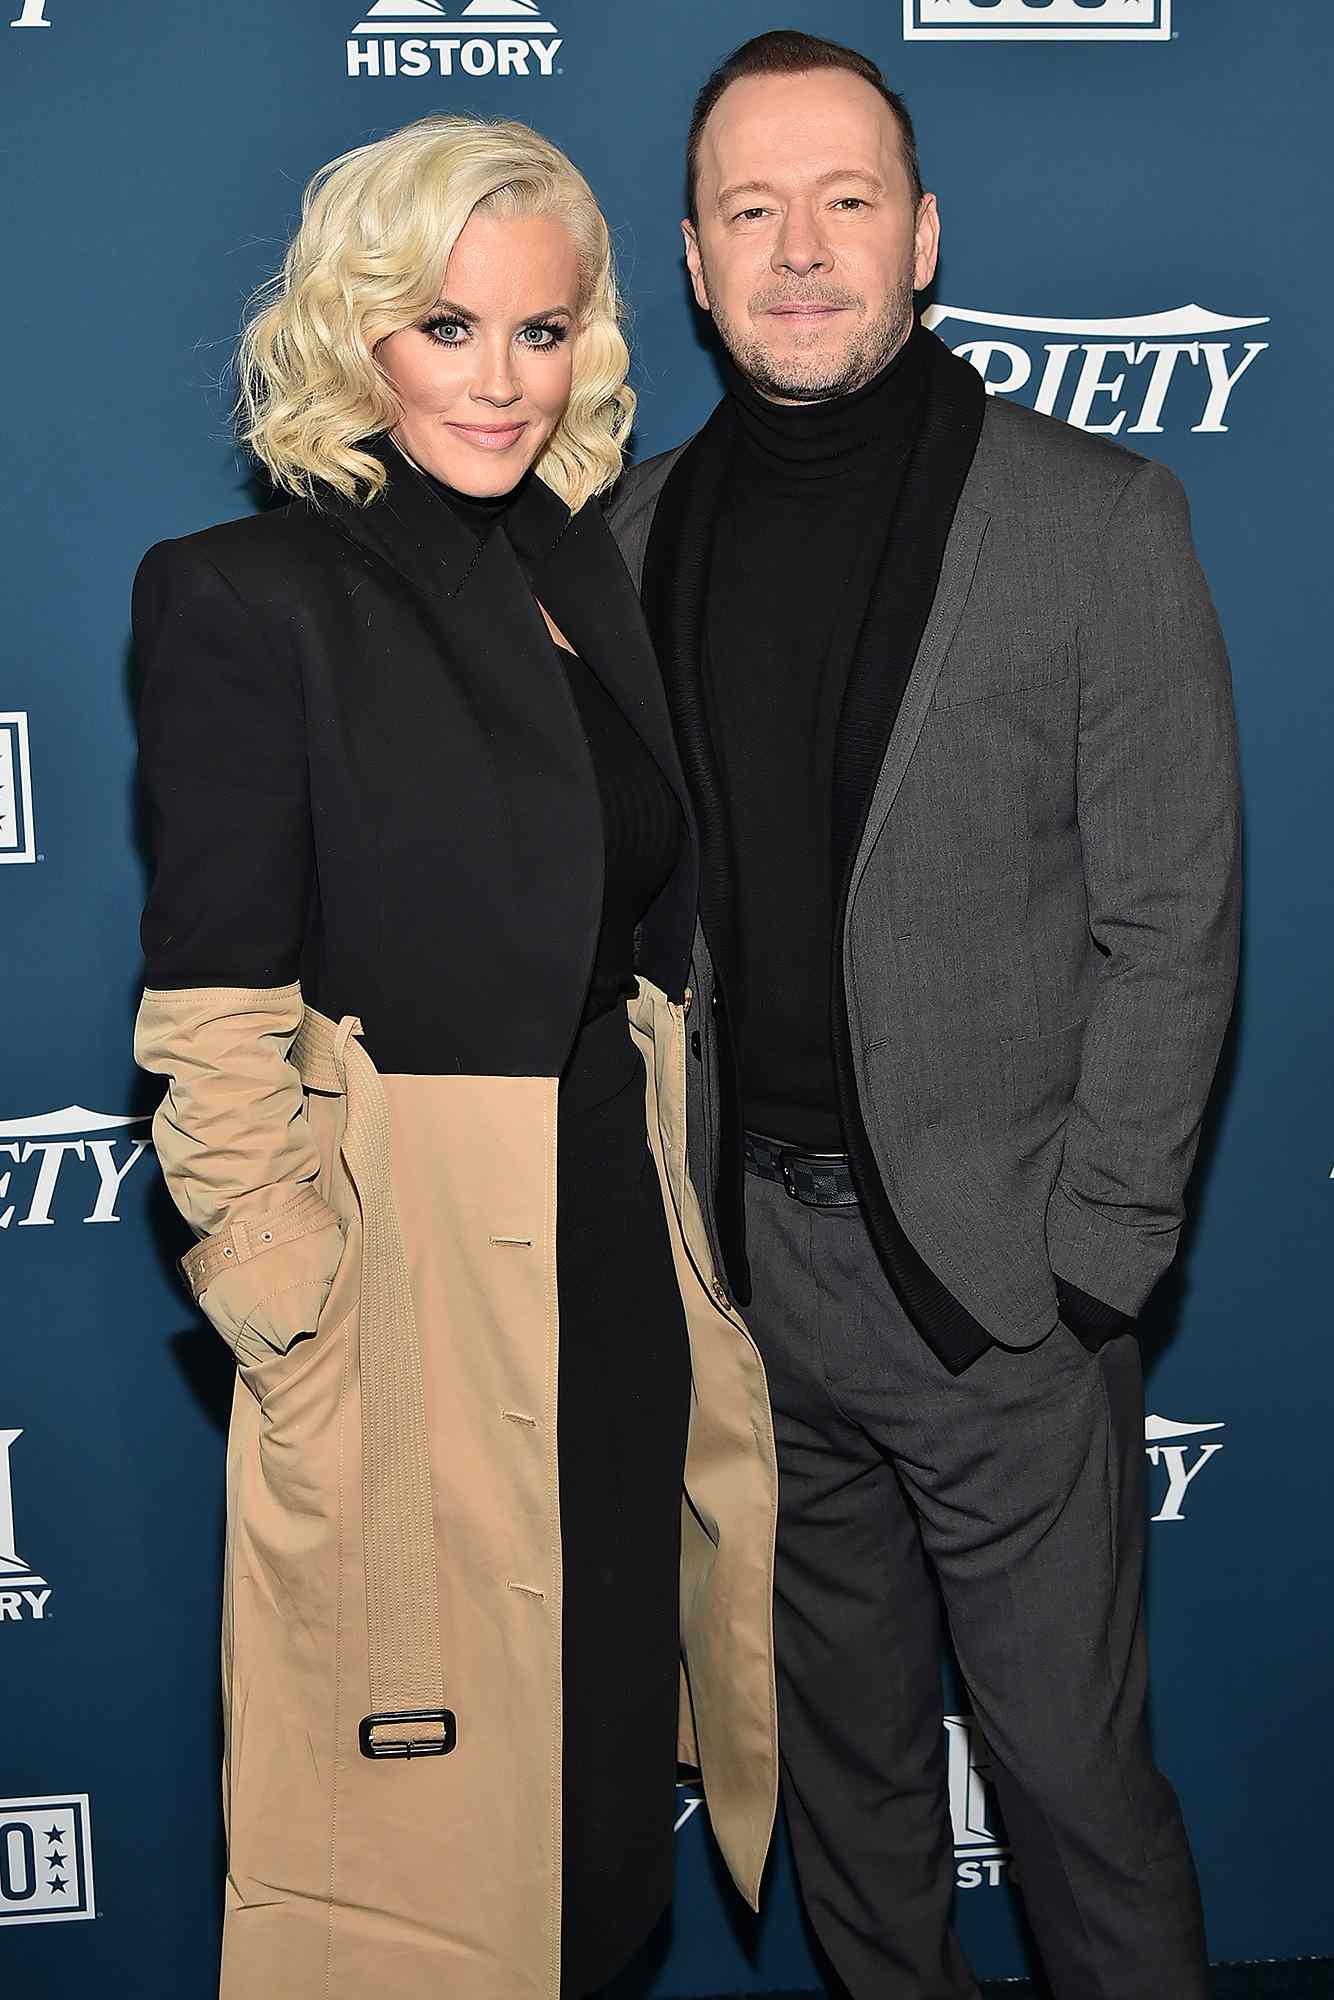    Jenny McCarthy med kul, Forlover Donnie Wahlberg 